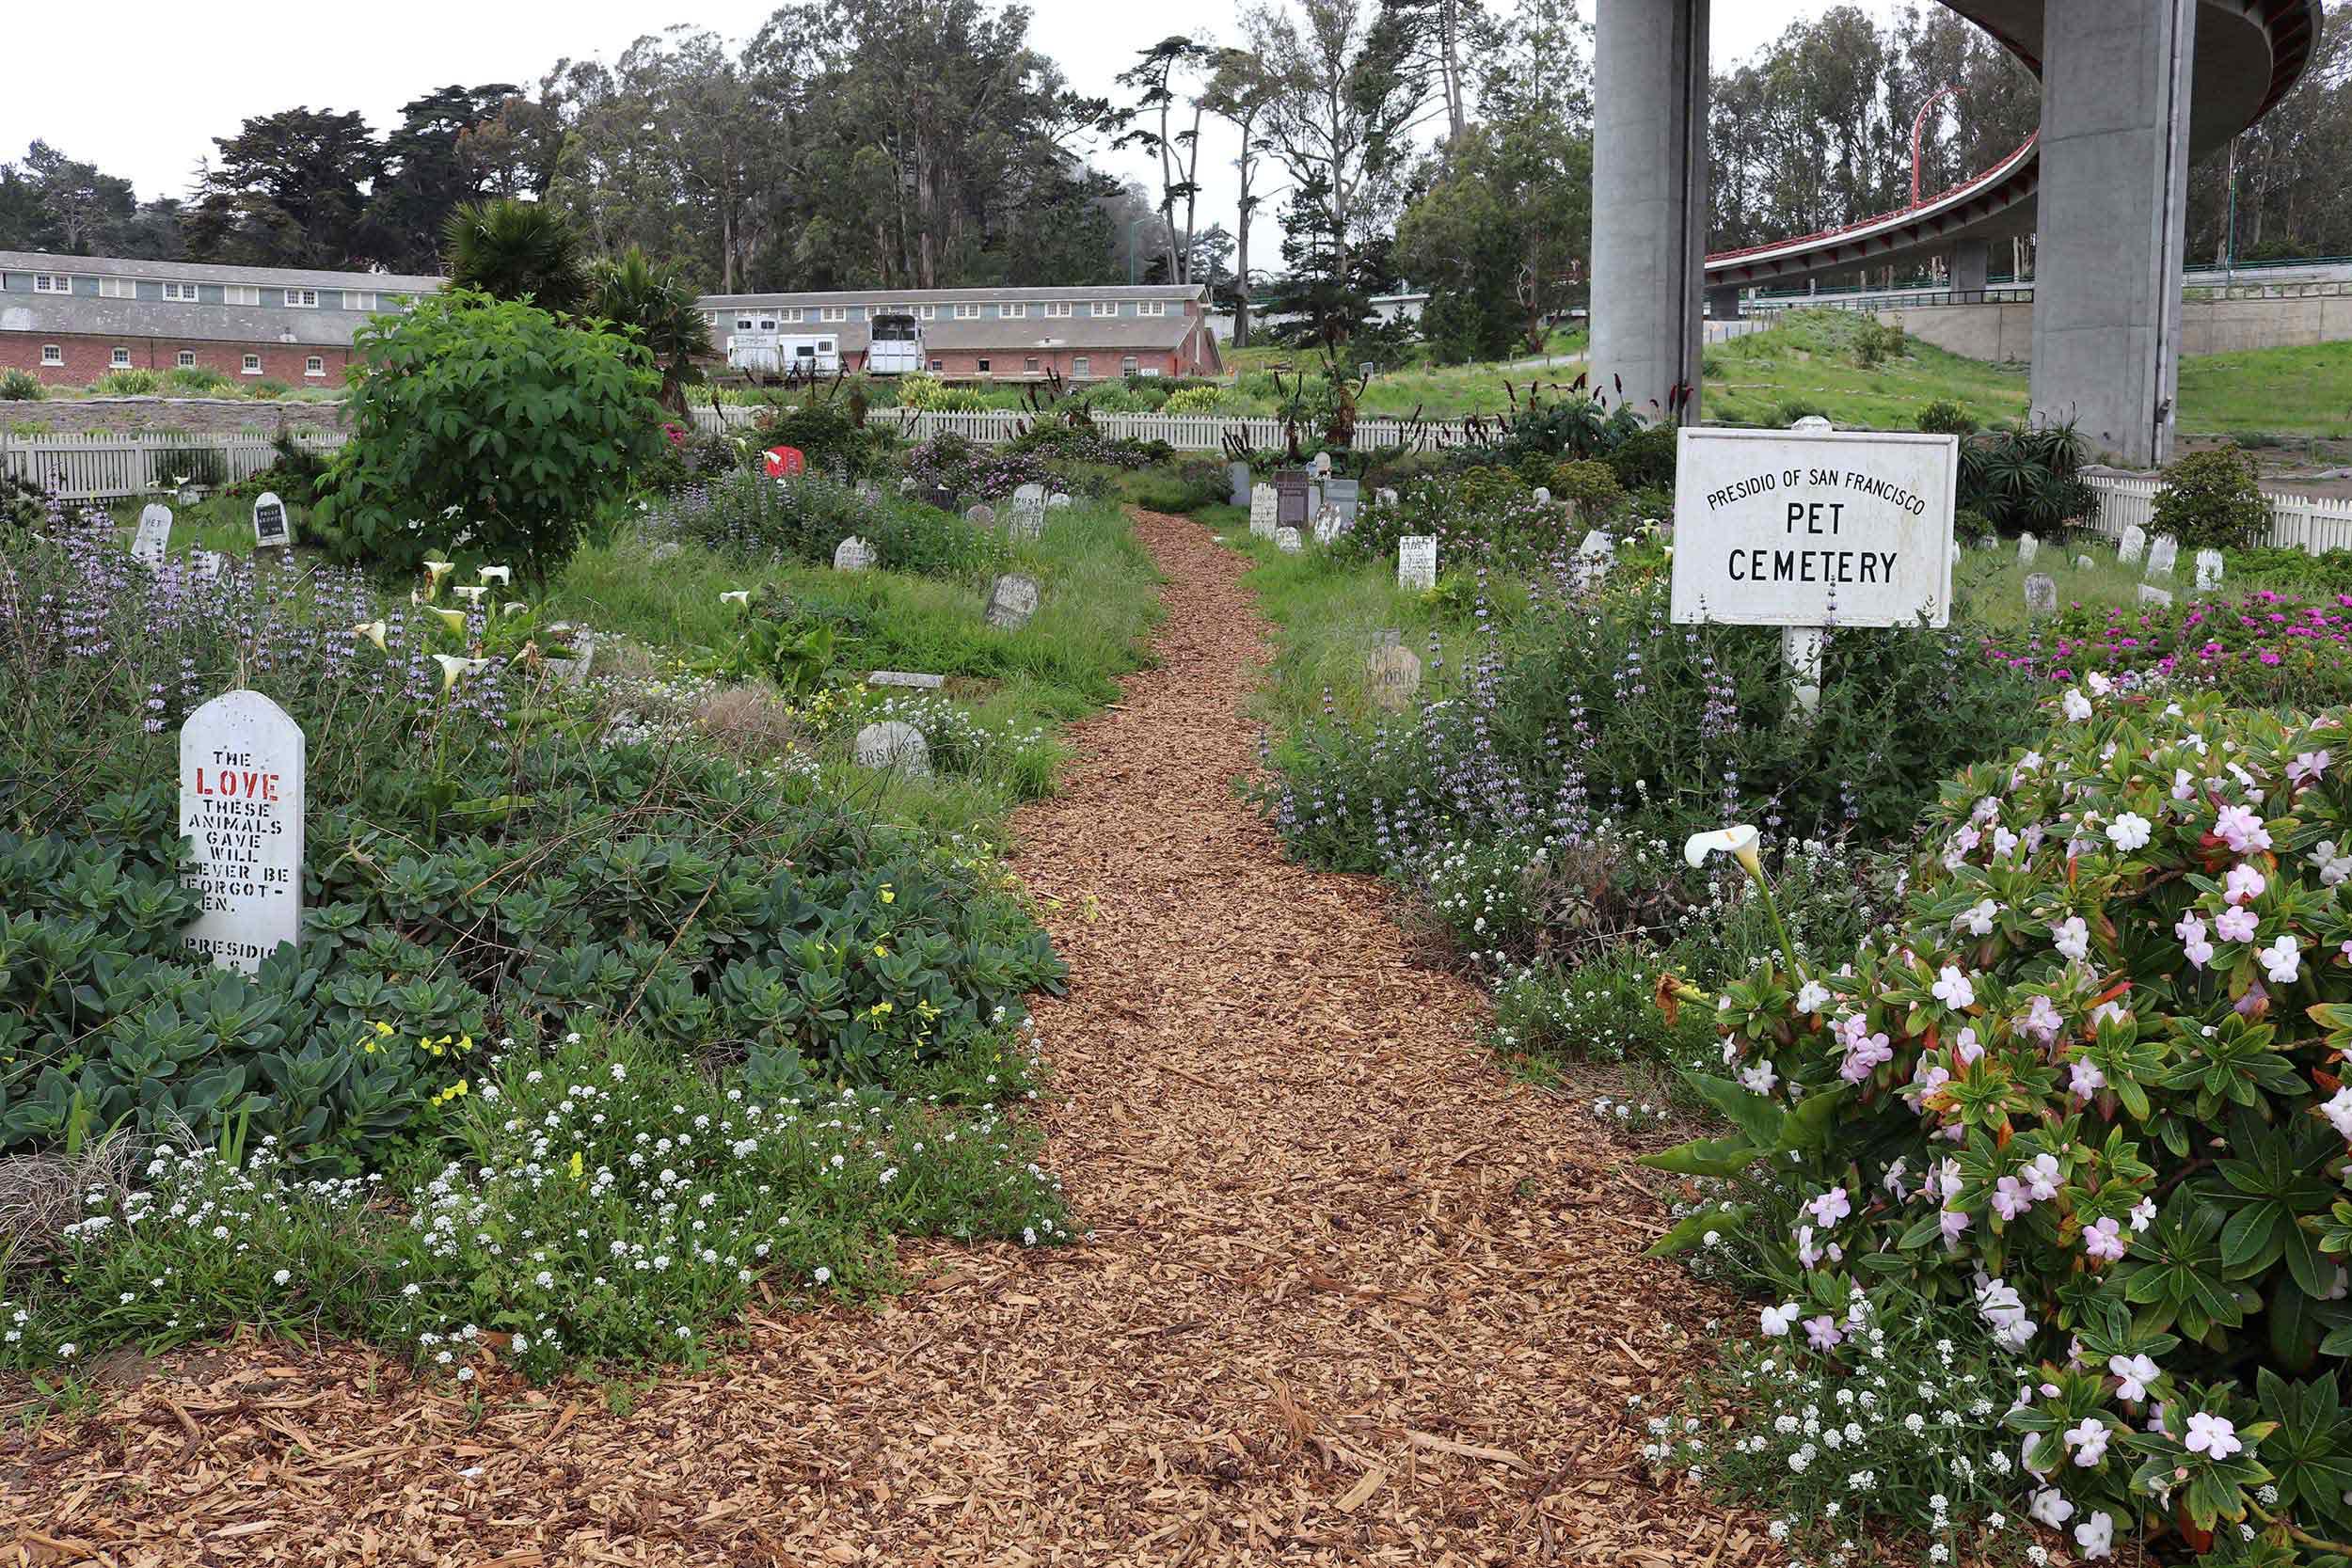 Presidio Pet Cemetery, with a path and gravestones visible.